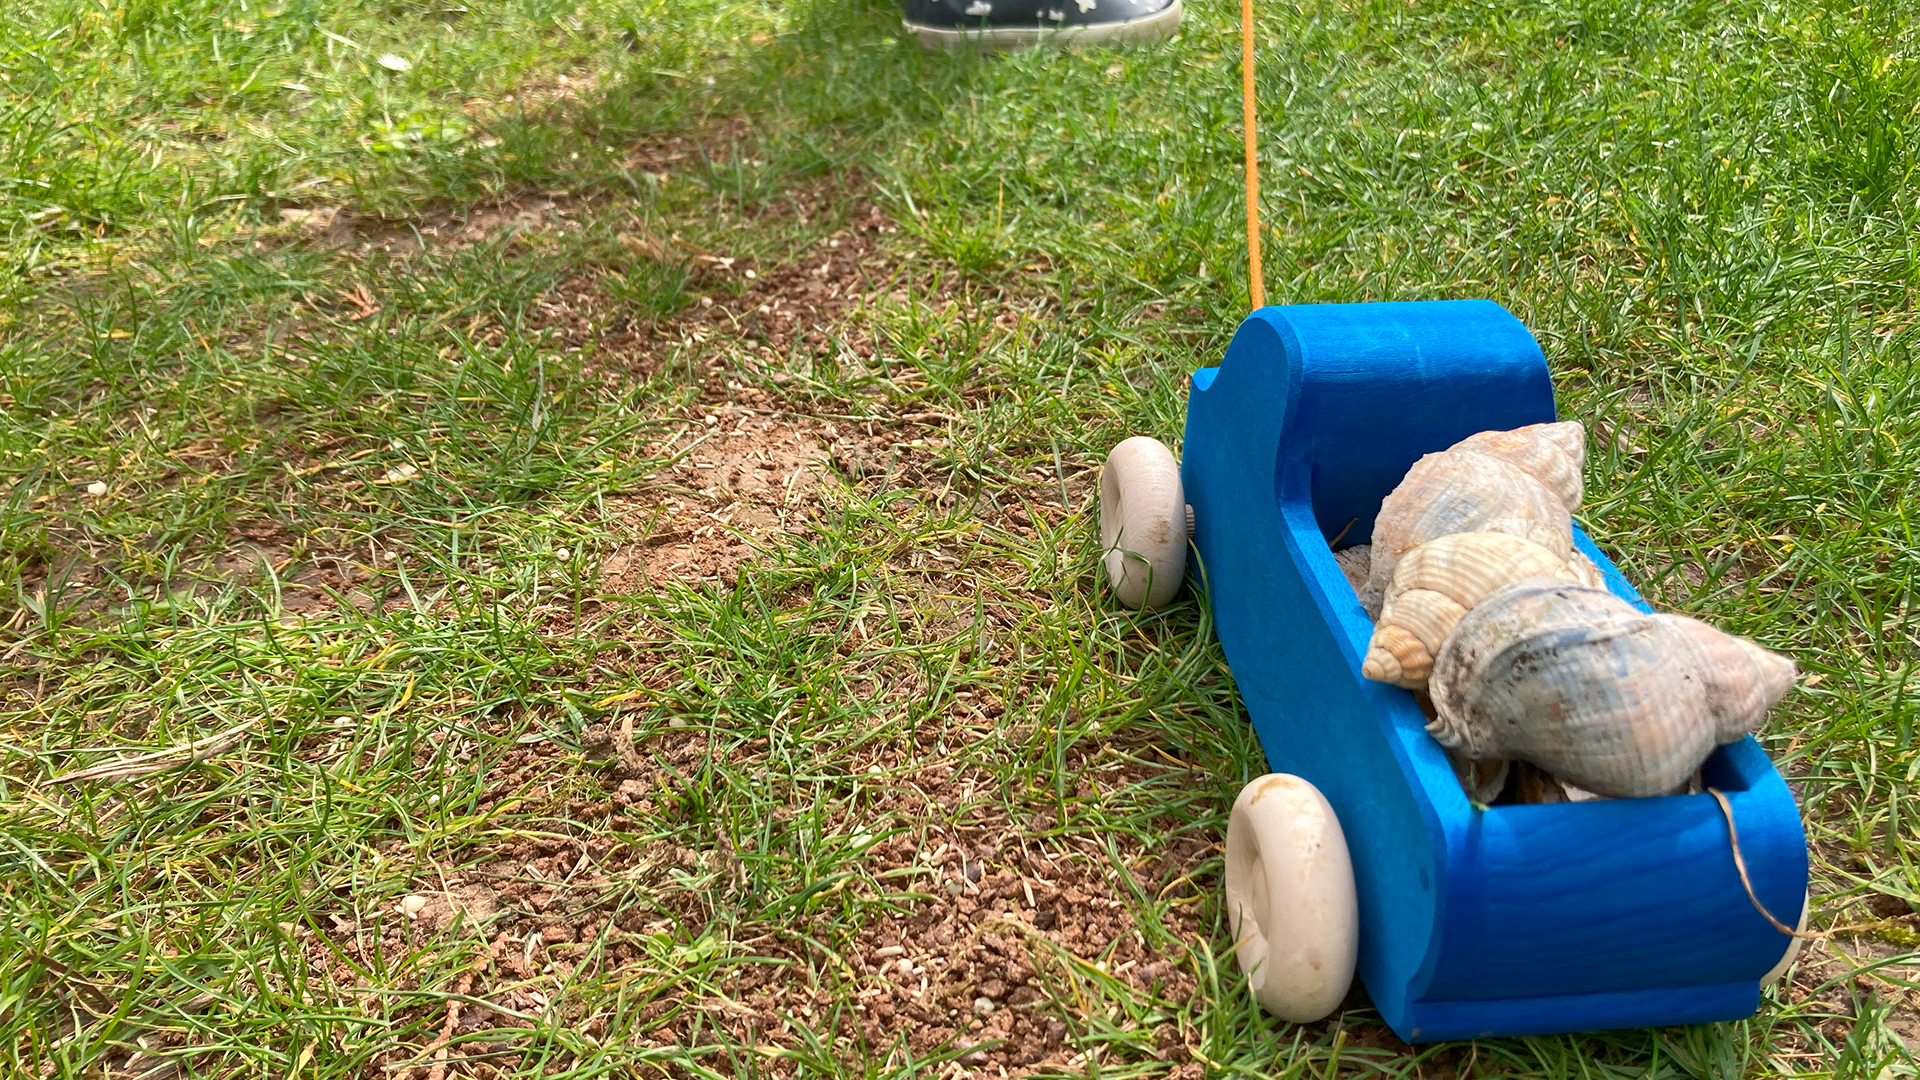 A tiny wooden truck is pulled along by a child fully loaded with shells.